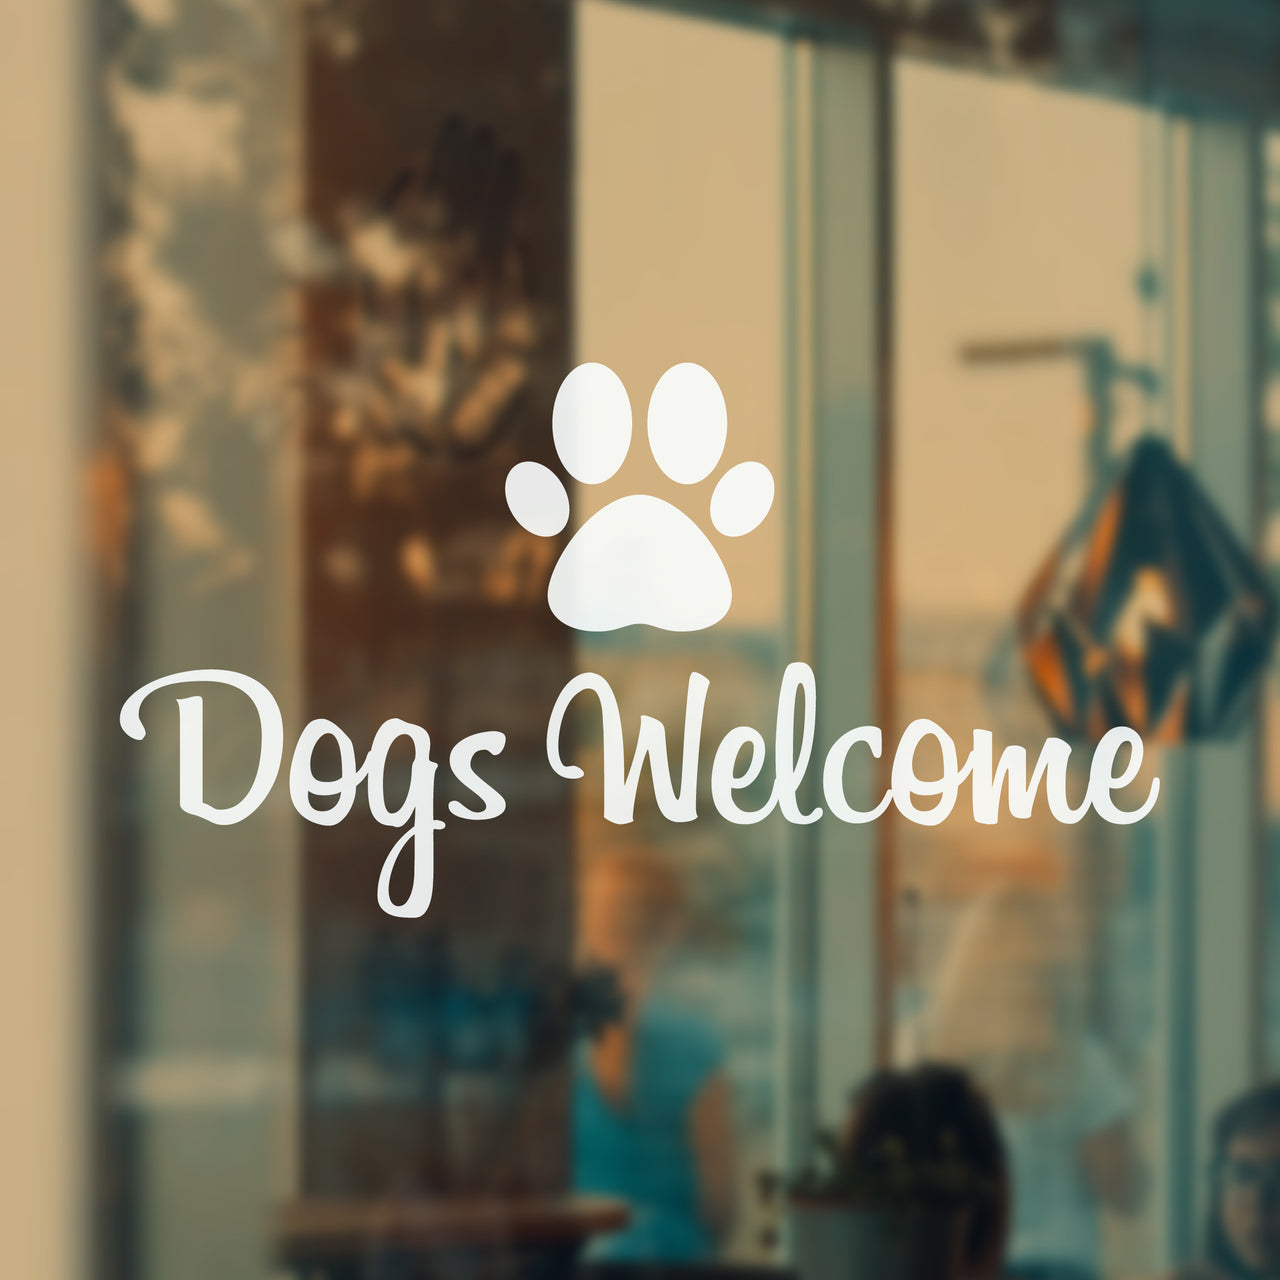 DOGS WELCOME - Business Shop Decal